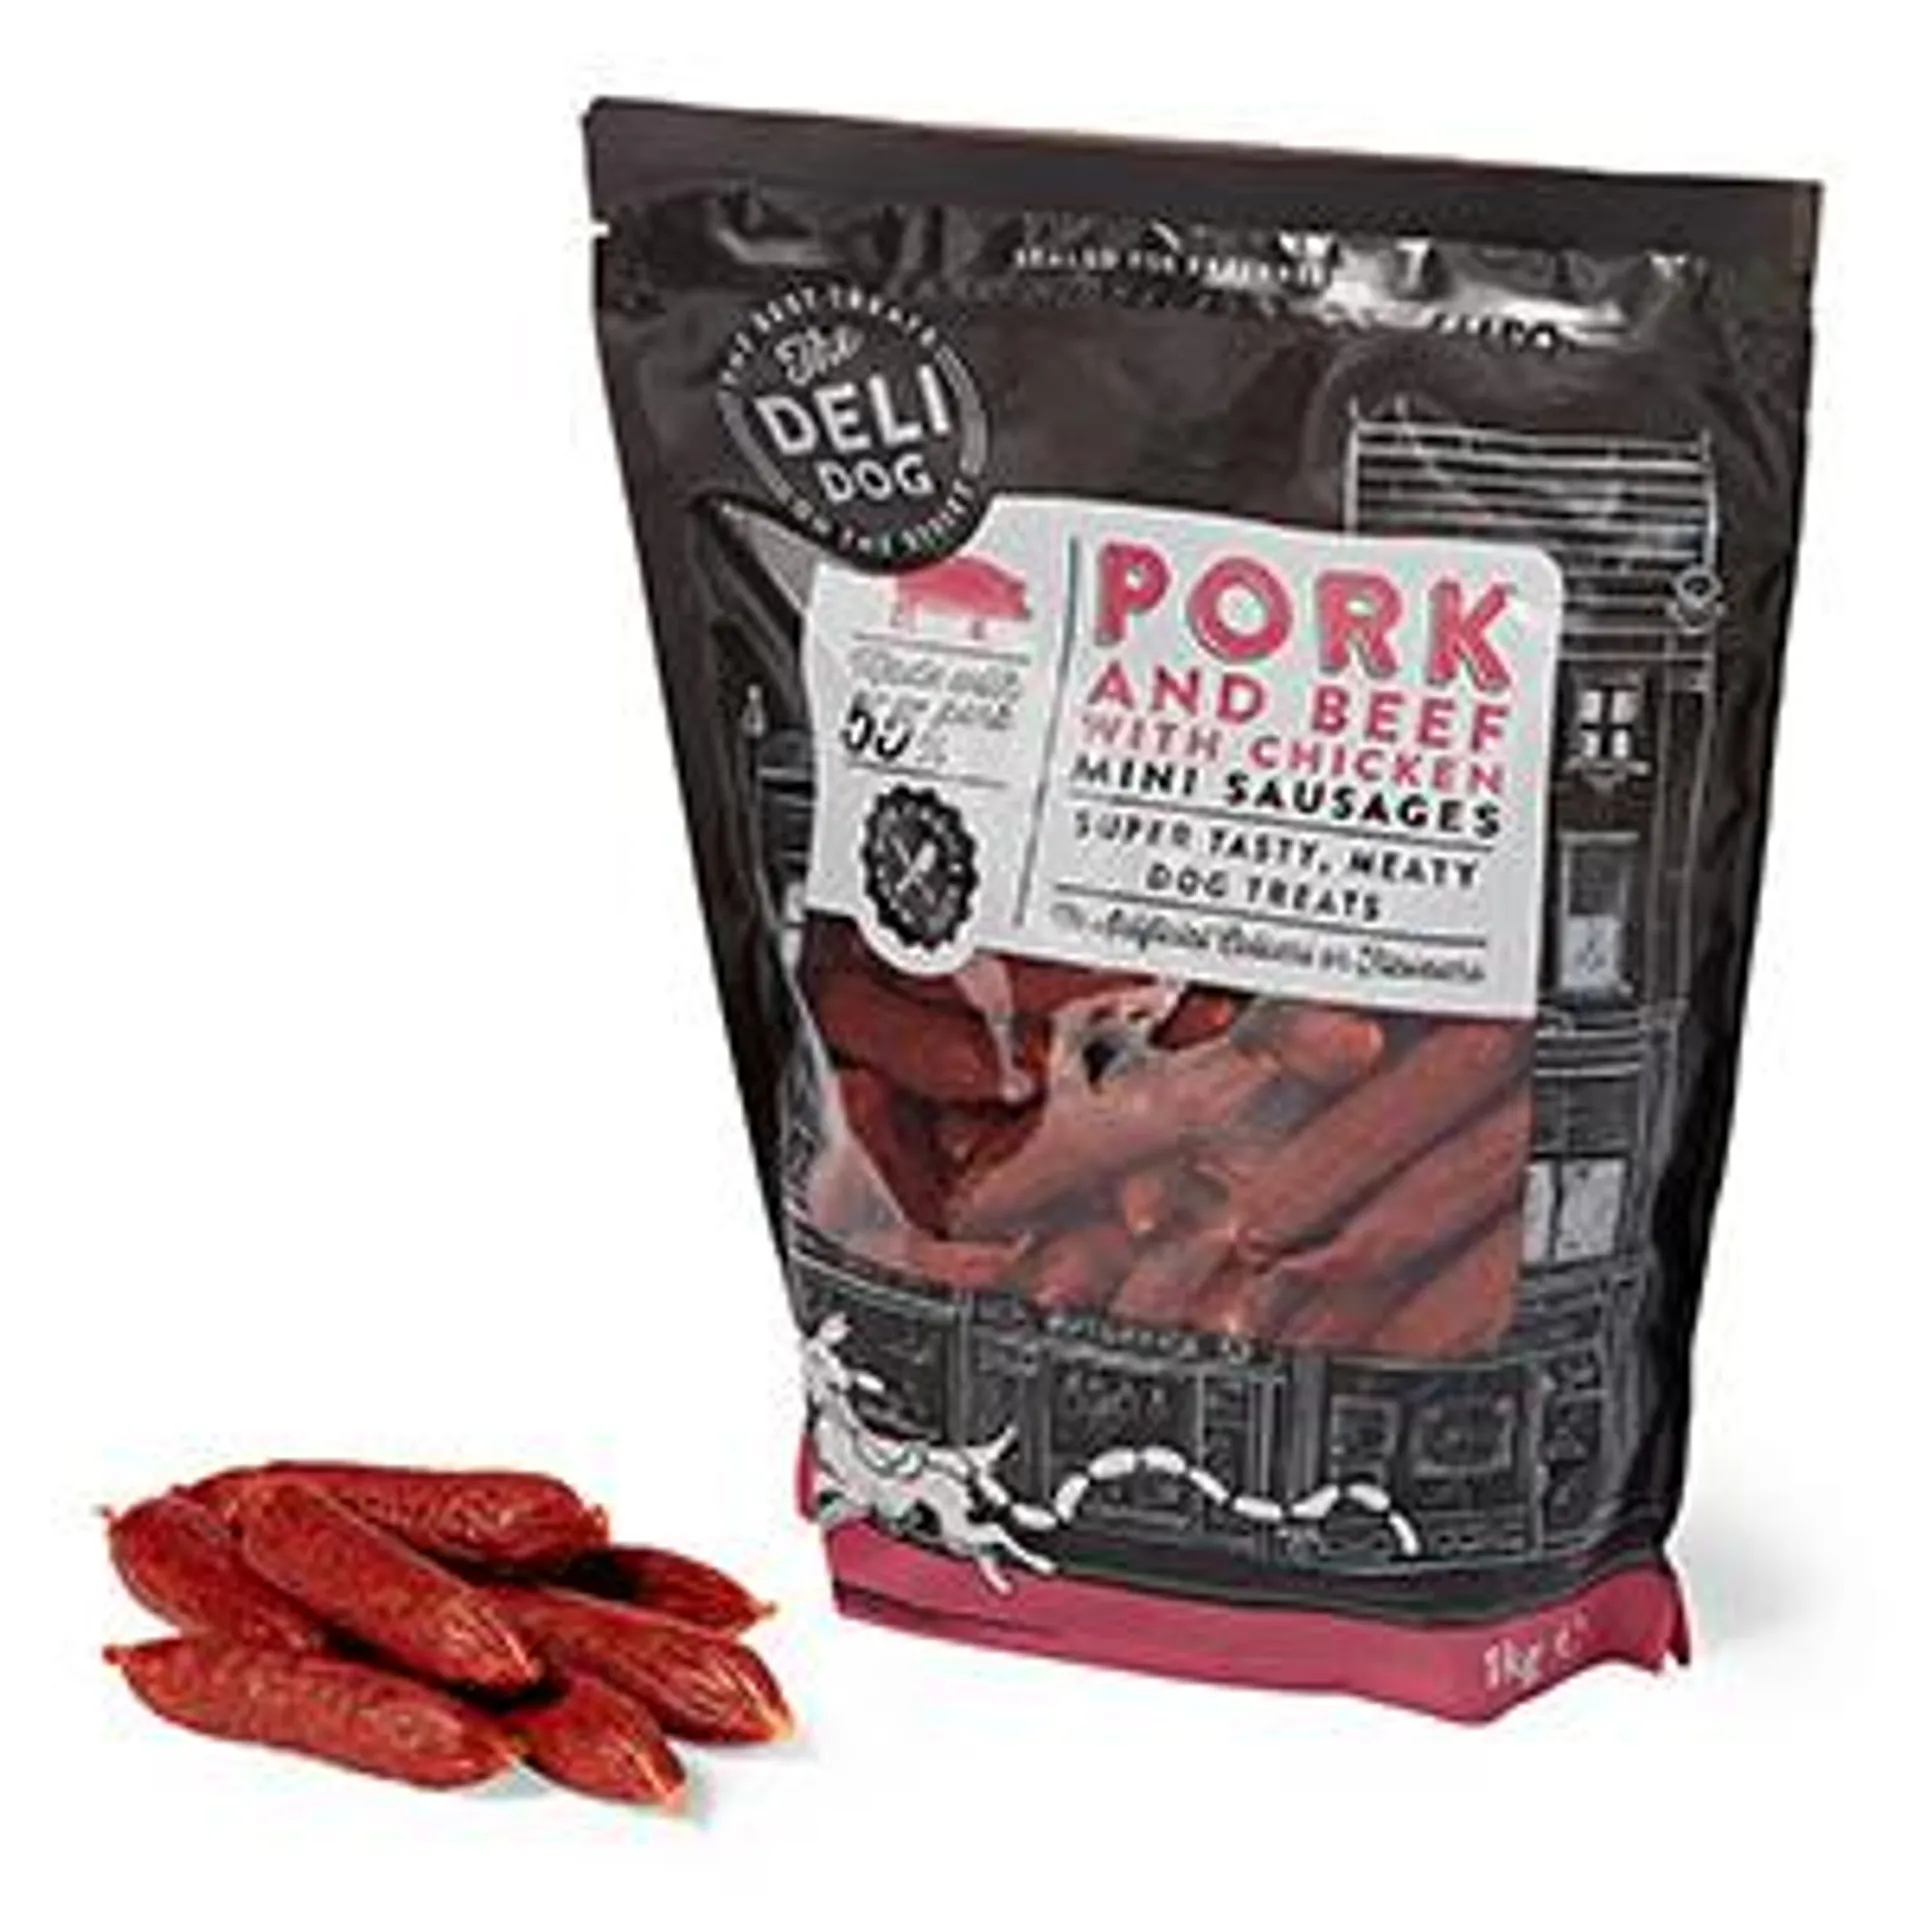 Pets at Home The Deli Dog Pork and Beef with Chicken Mini Sausages Dog Treats 1kg